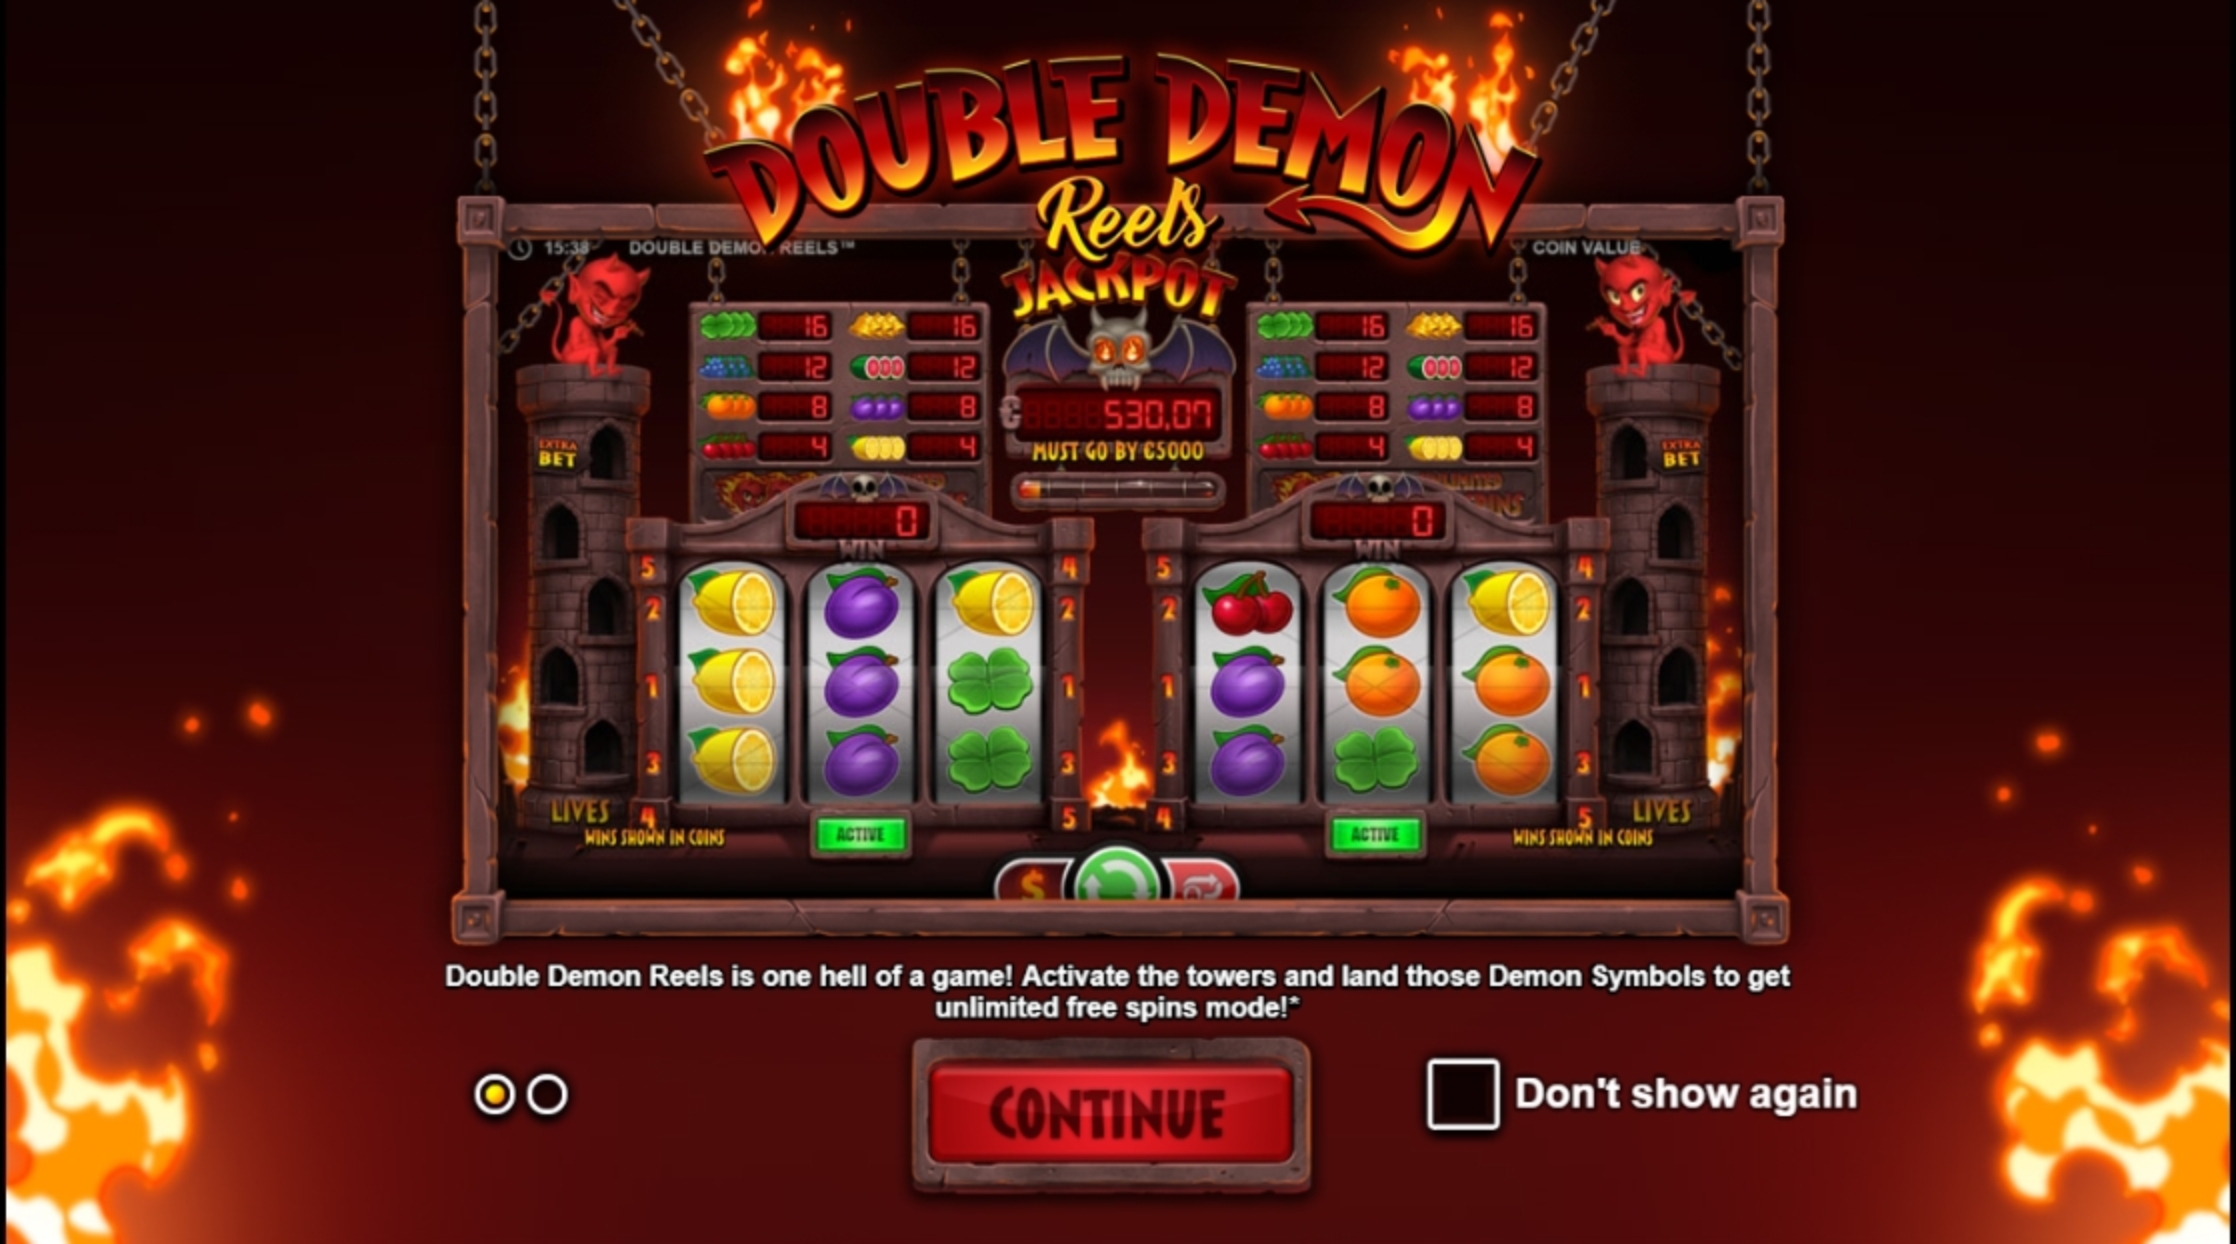 Play Double Demon Reels Free Casino Slot Game by Betsson Group